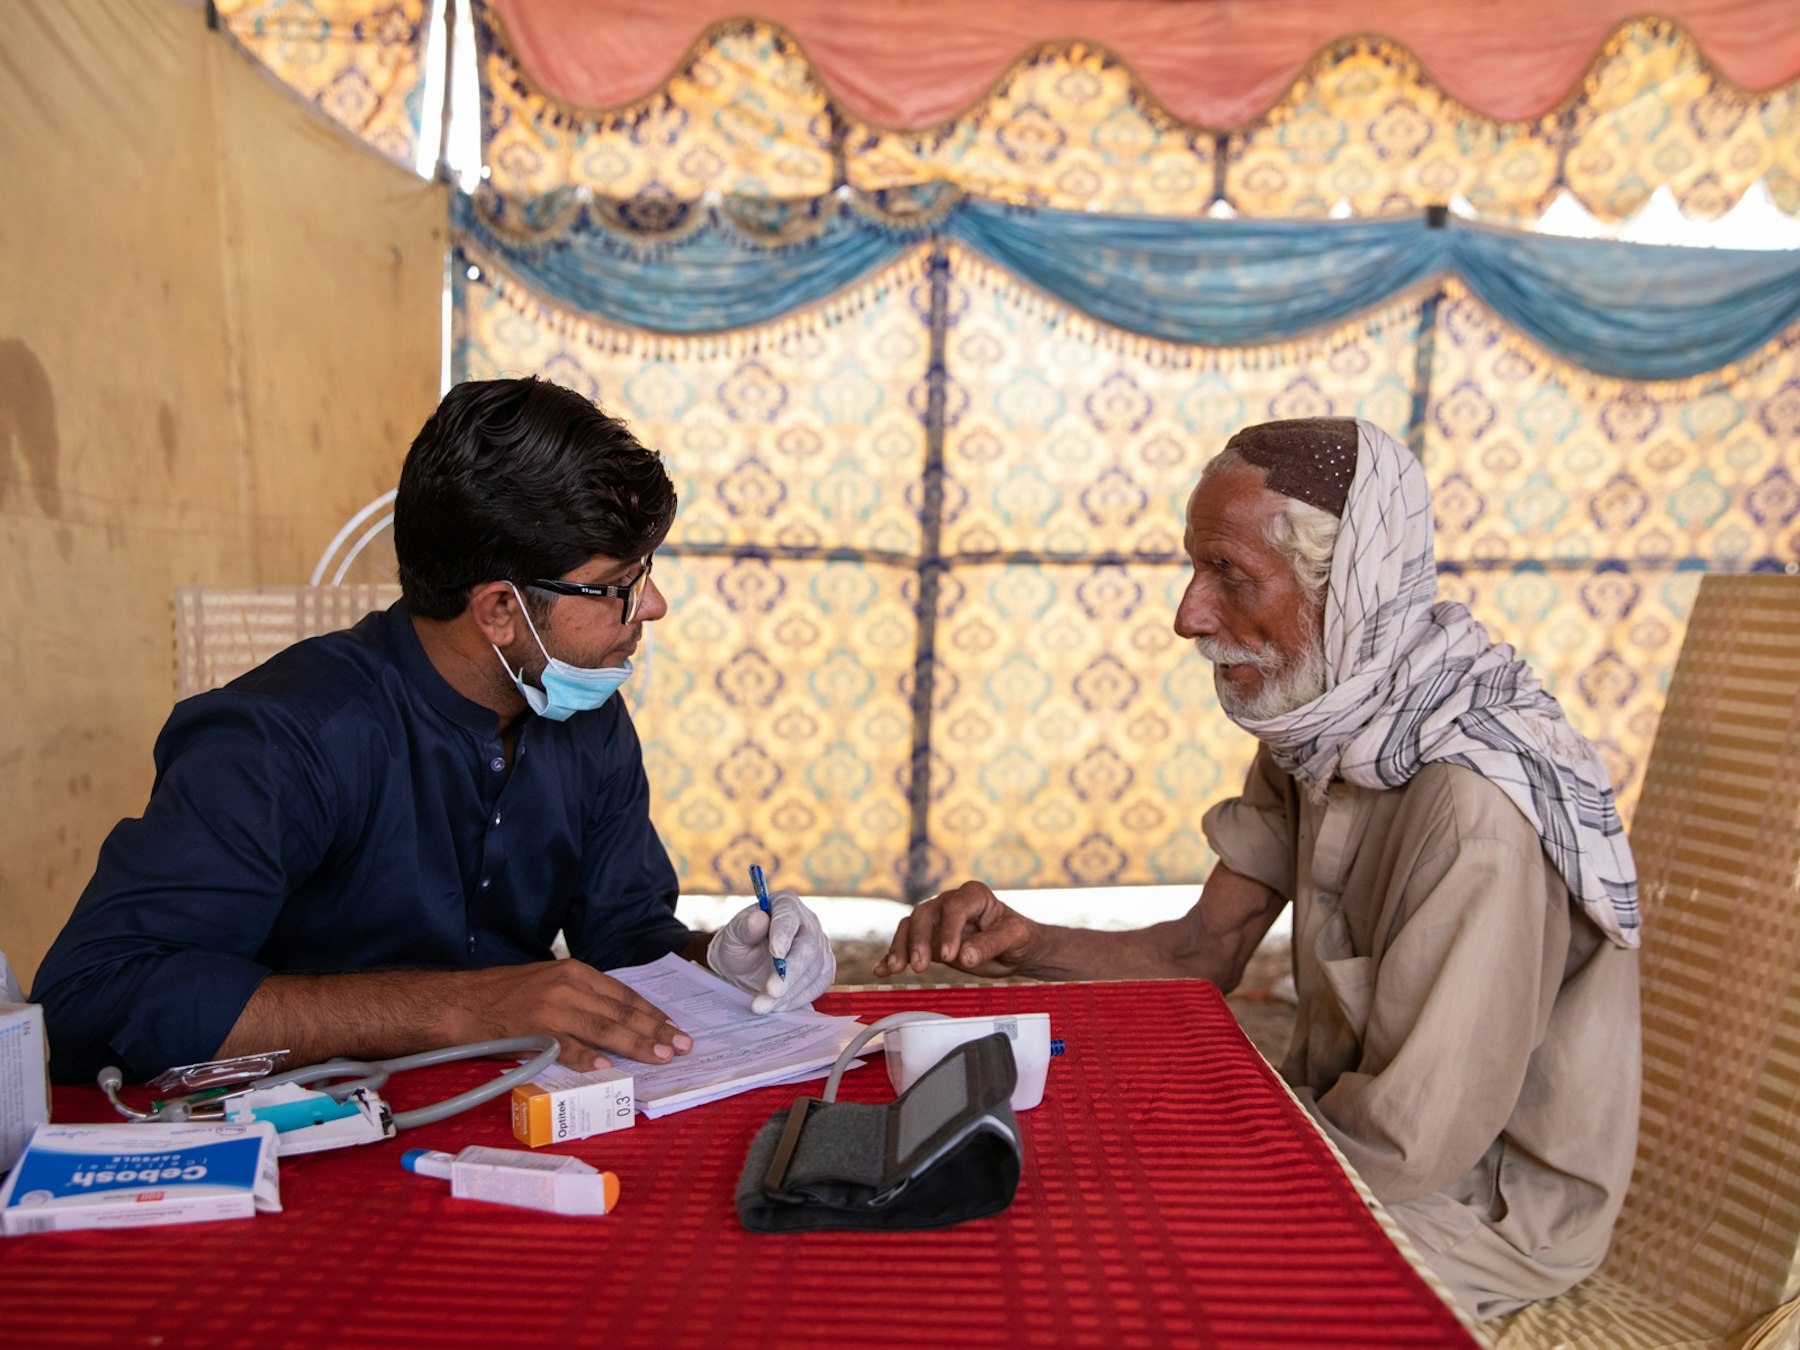 An elderly man gets assessed for iron deficiency, fever and cough inside an AKU healthcare camp in Dadu District on 26 September 2022. Photo credit: AKDN / Insiya Syed